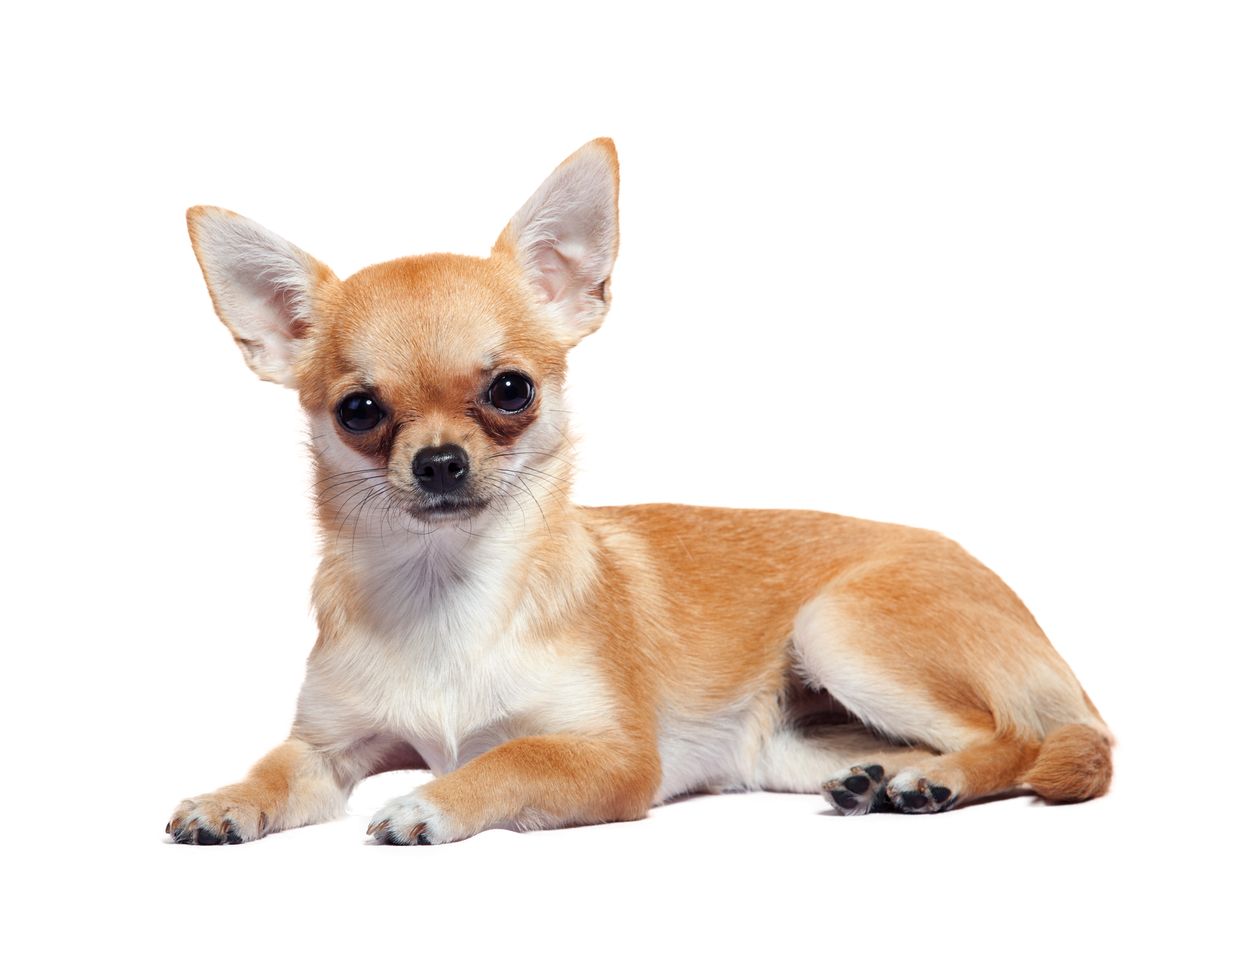 Chihuahua Breeds 7 Background Wallpaper, Chihuahua PNG HD - Free PNG